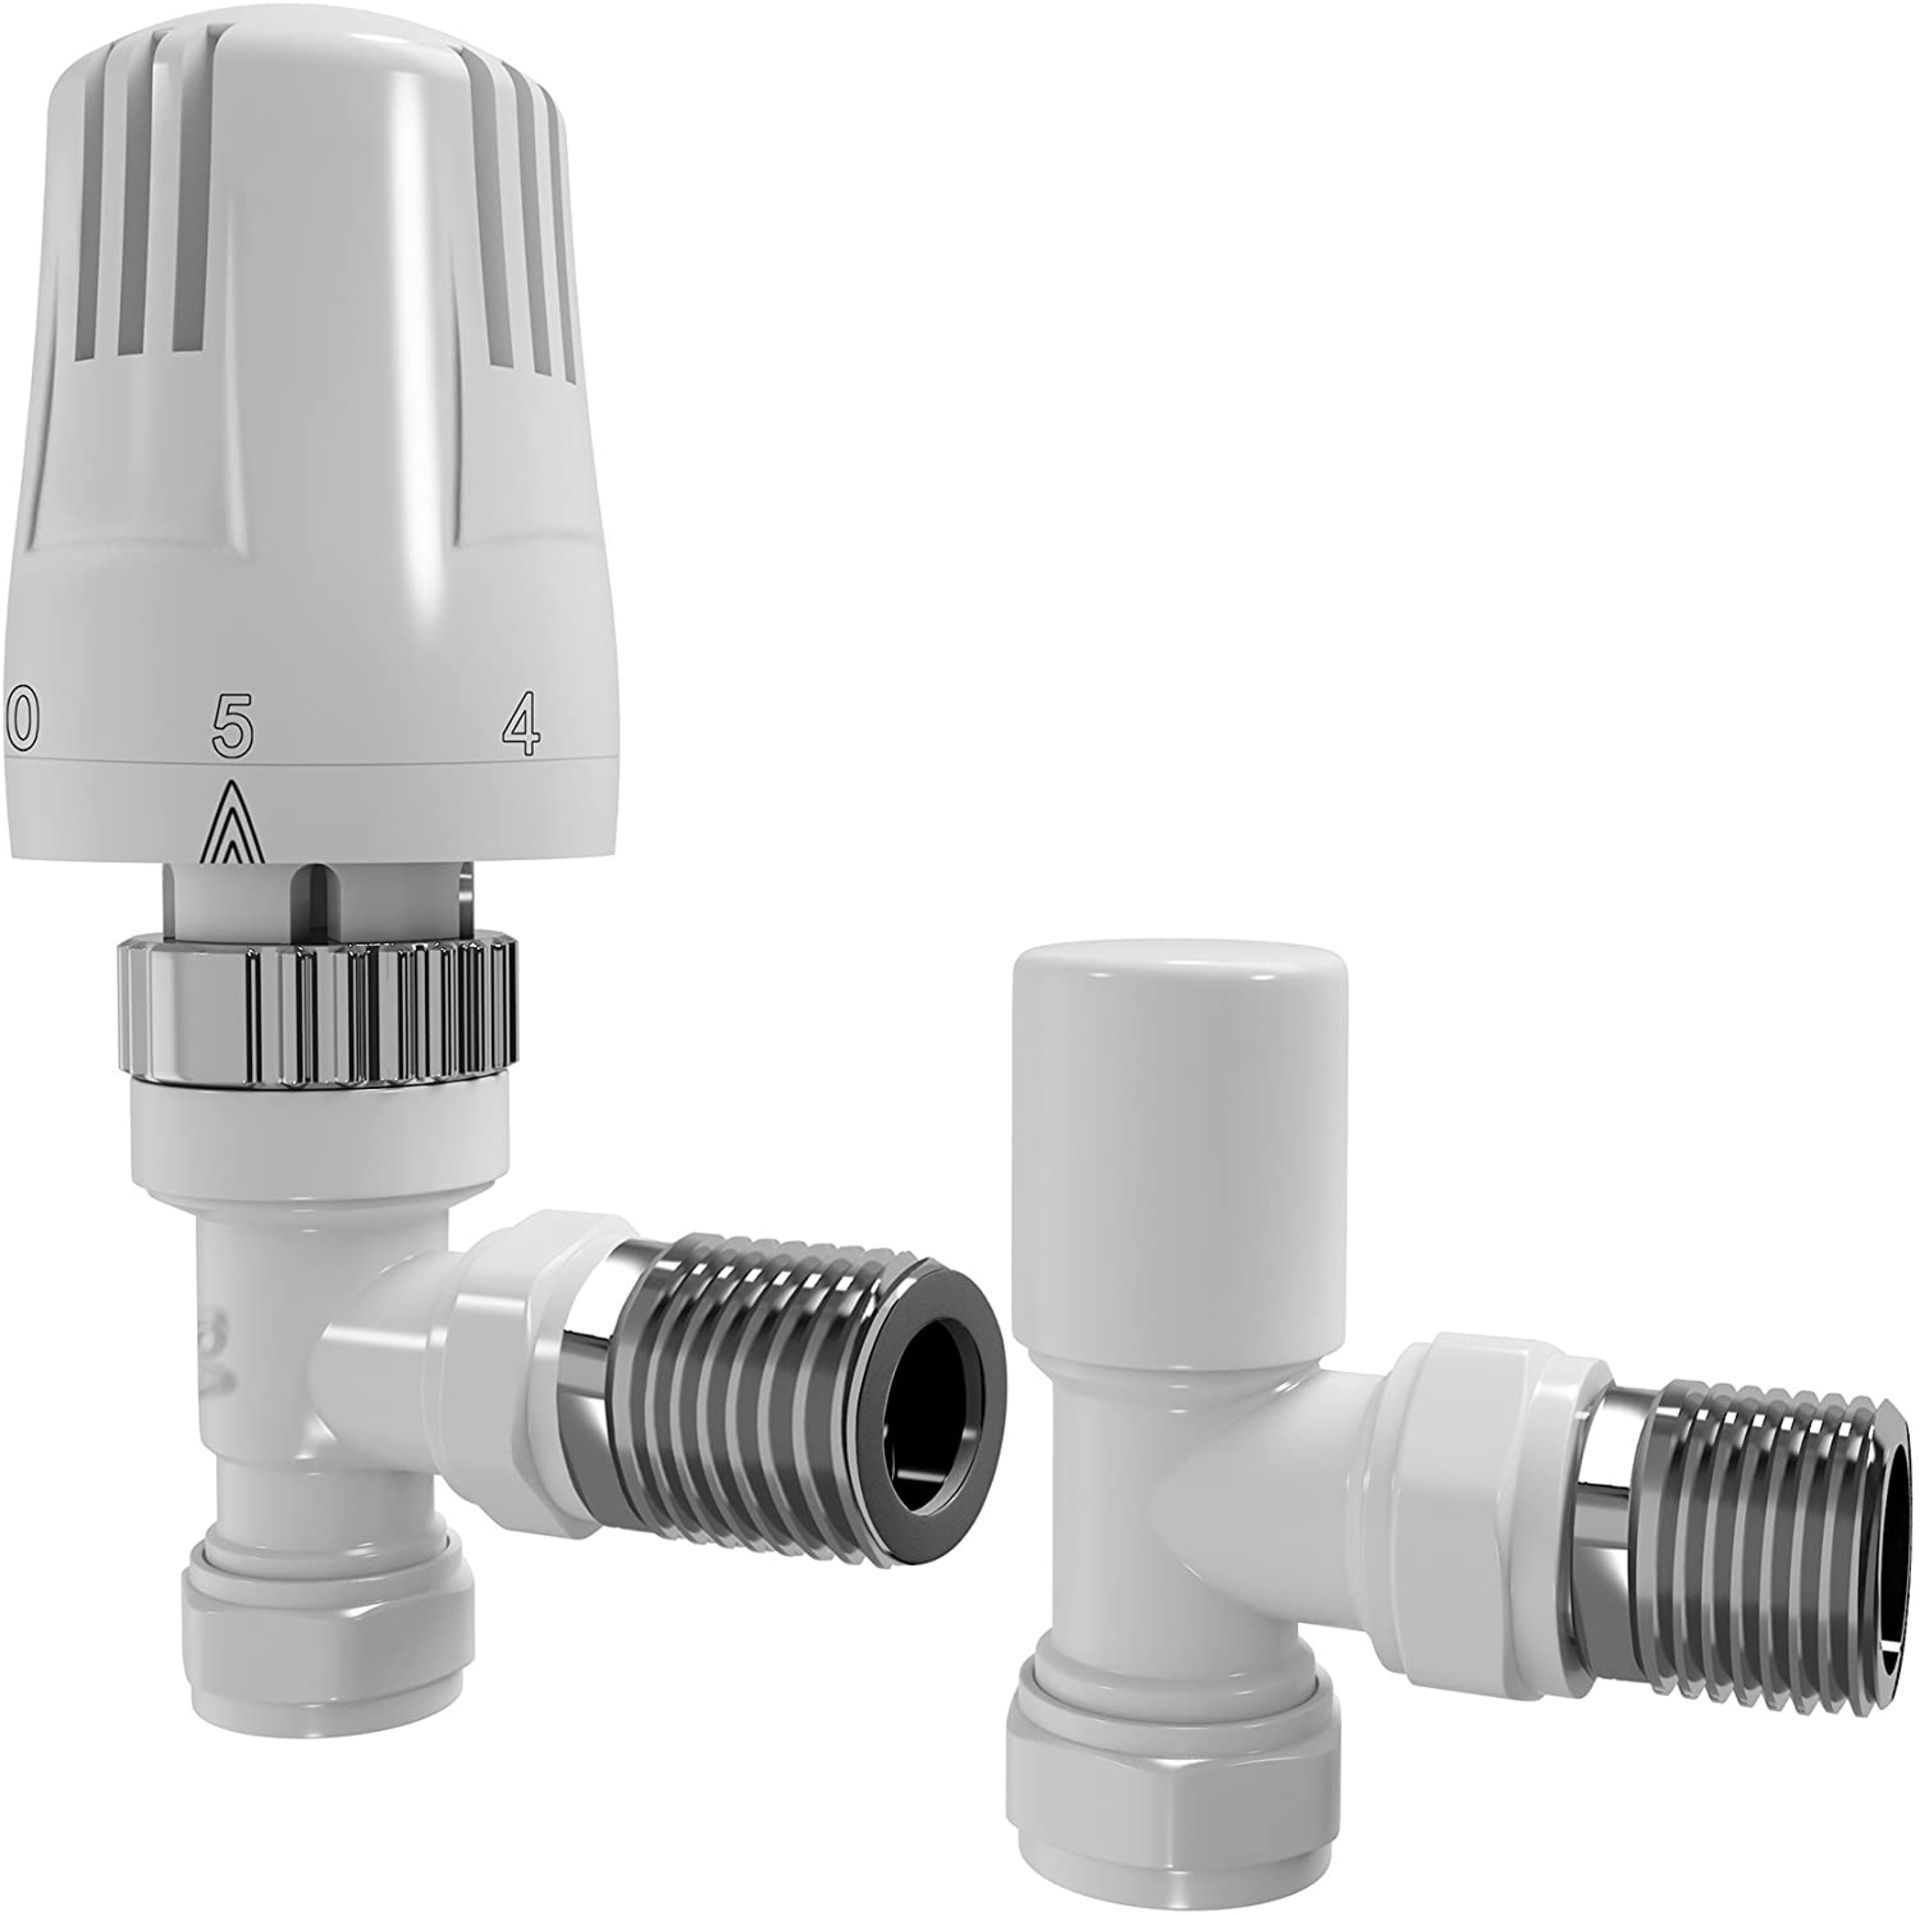 NEW & BOXED White Thermostatic Angled Radiator Valves TRV T15mm Central Heating Taps. RA32A....